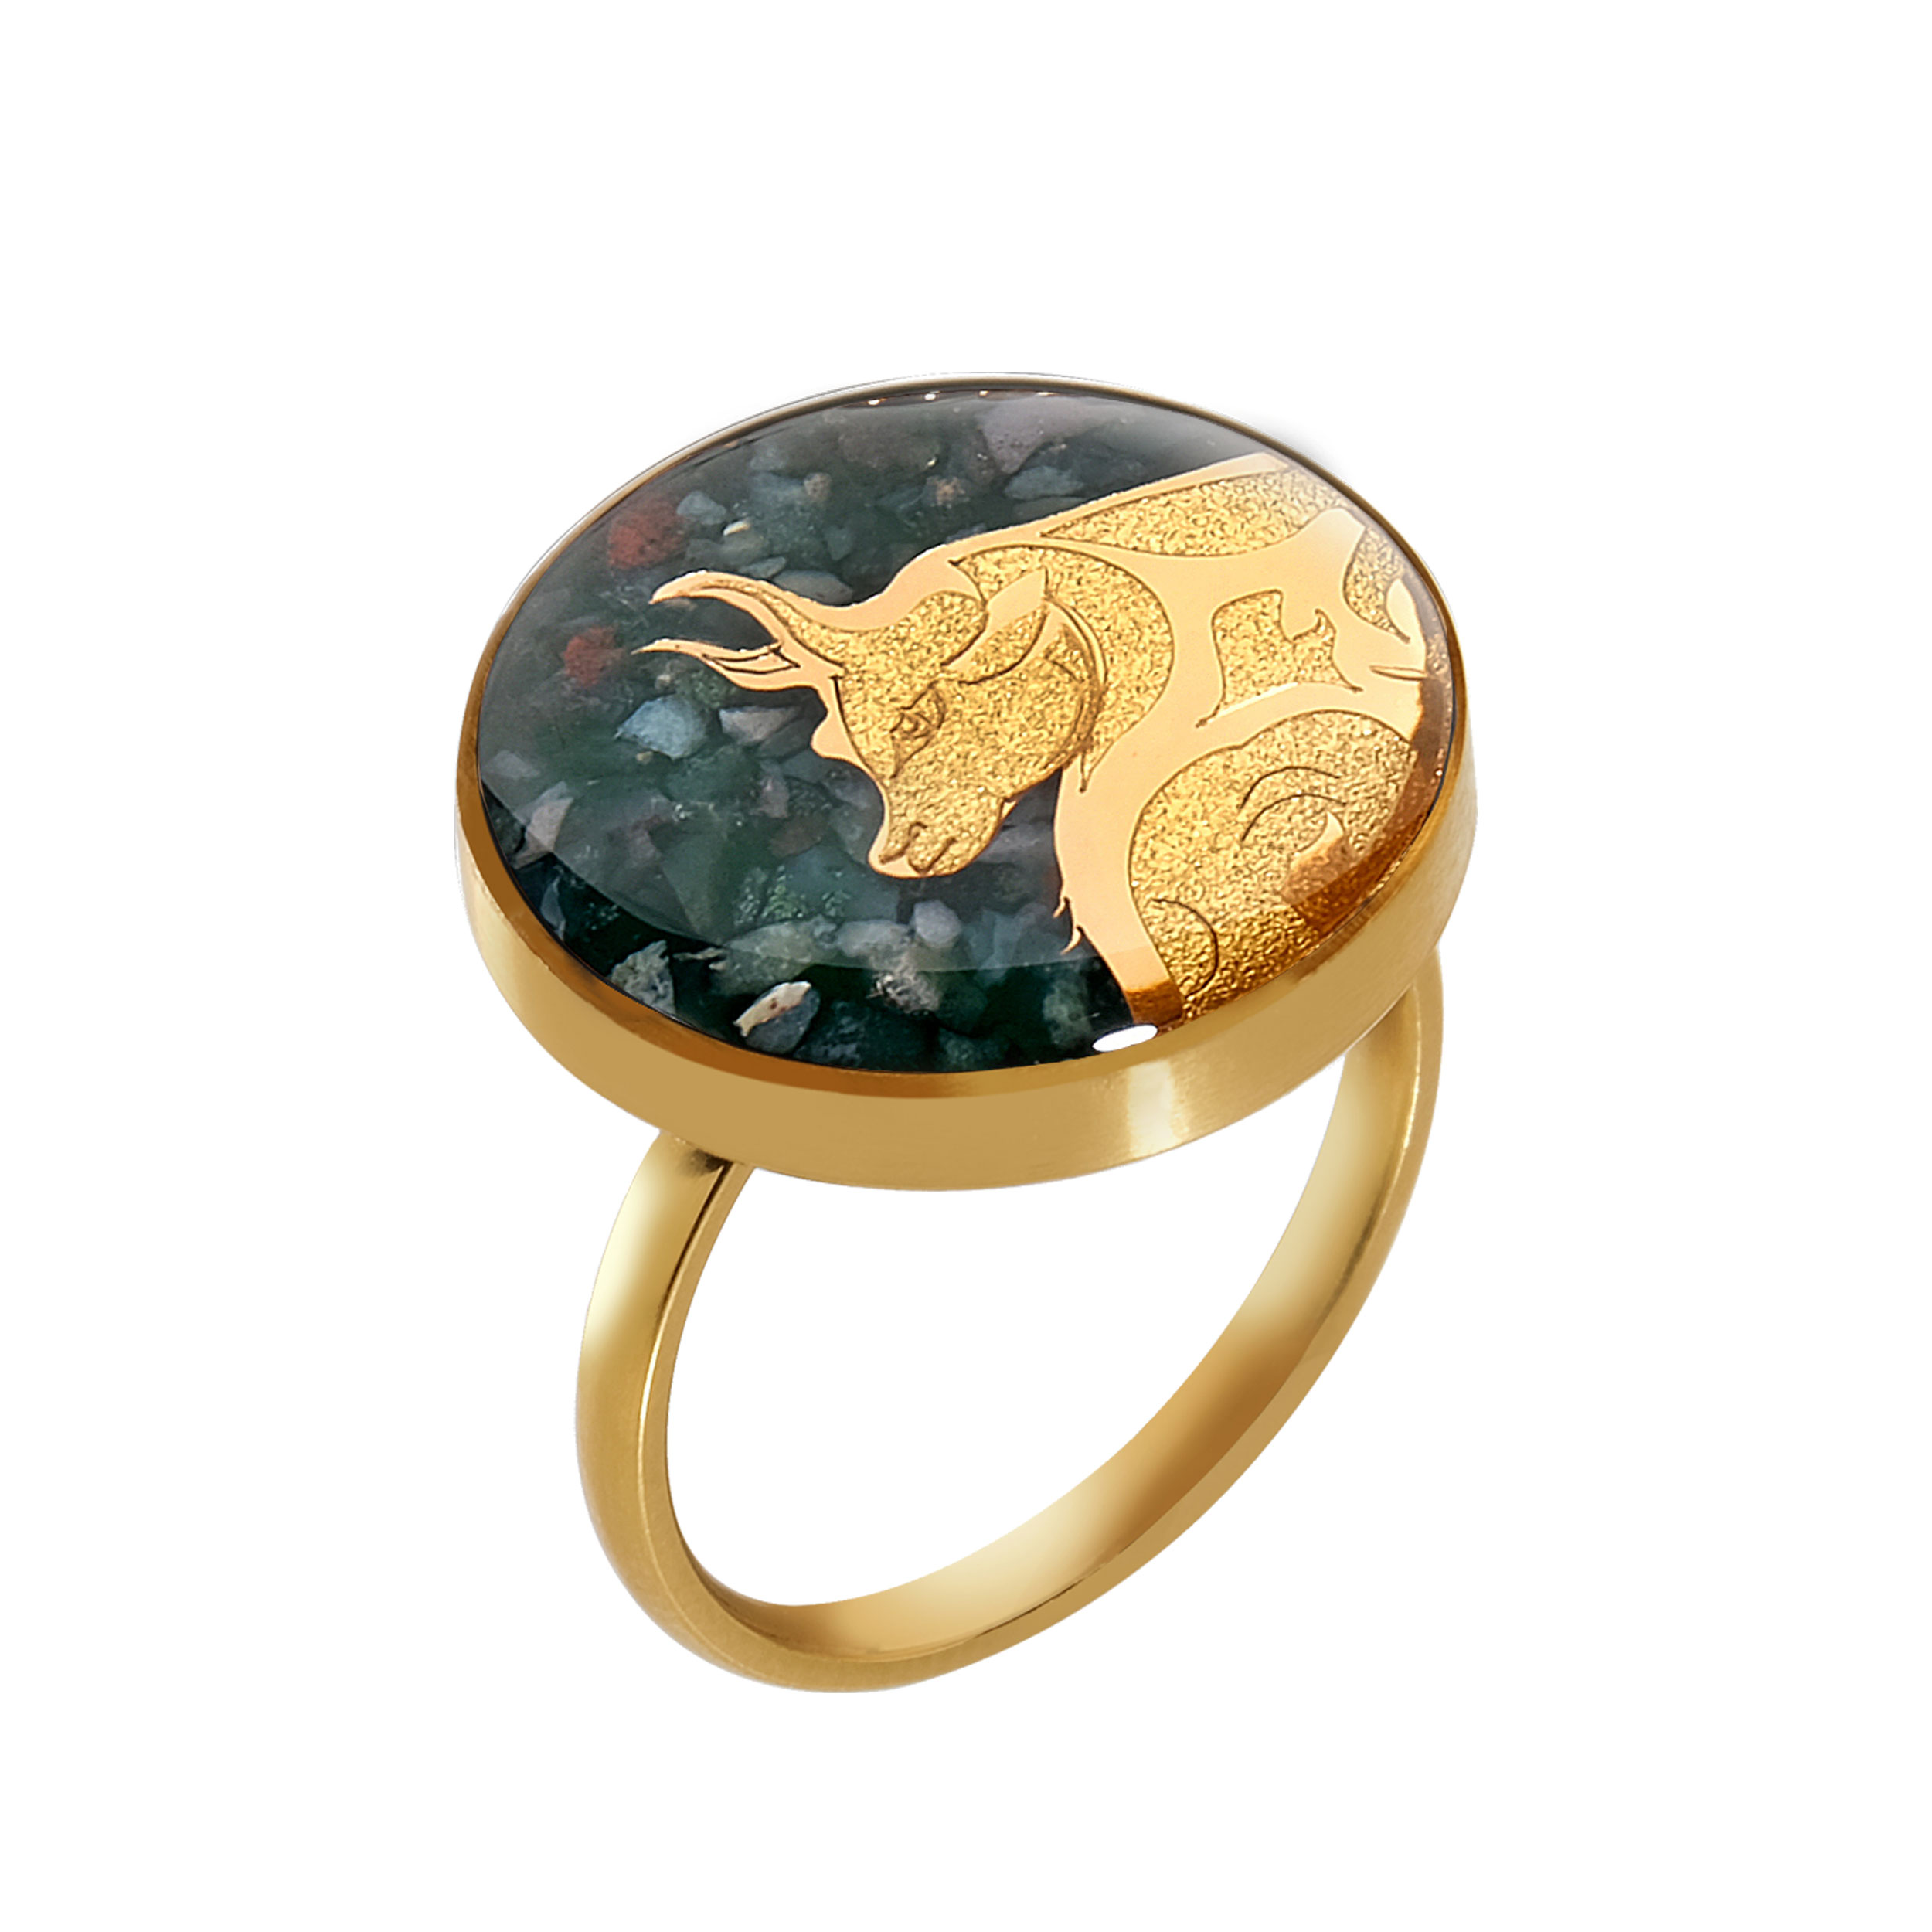 Agate ring and 24 carat gold leaf with the symbol design of May